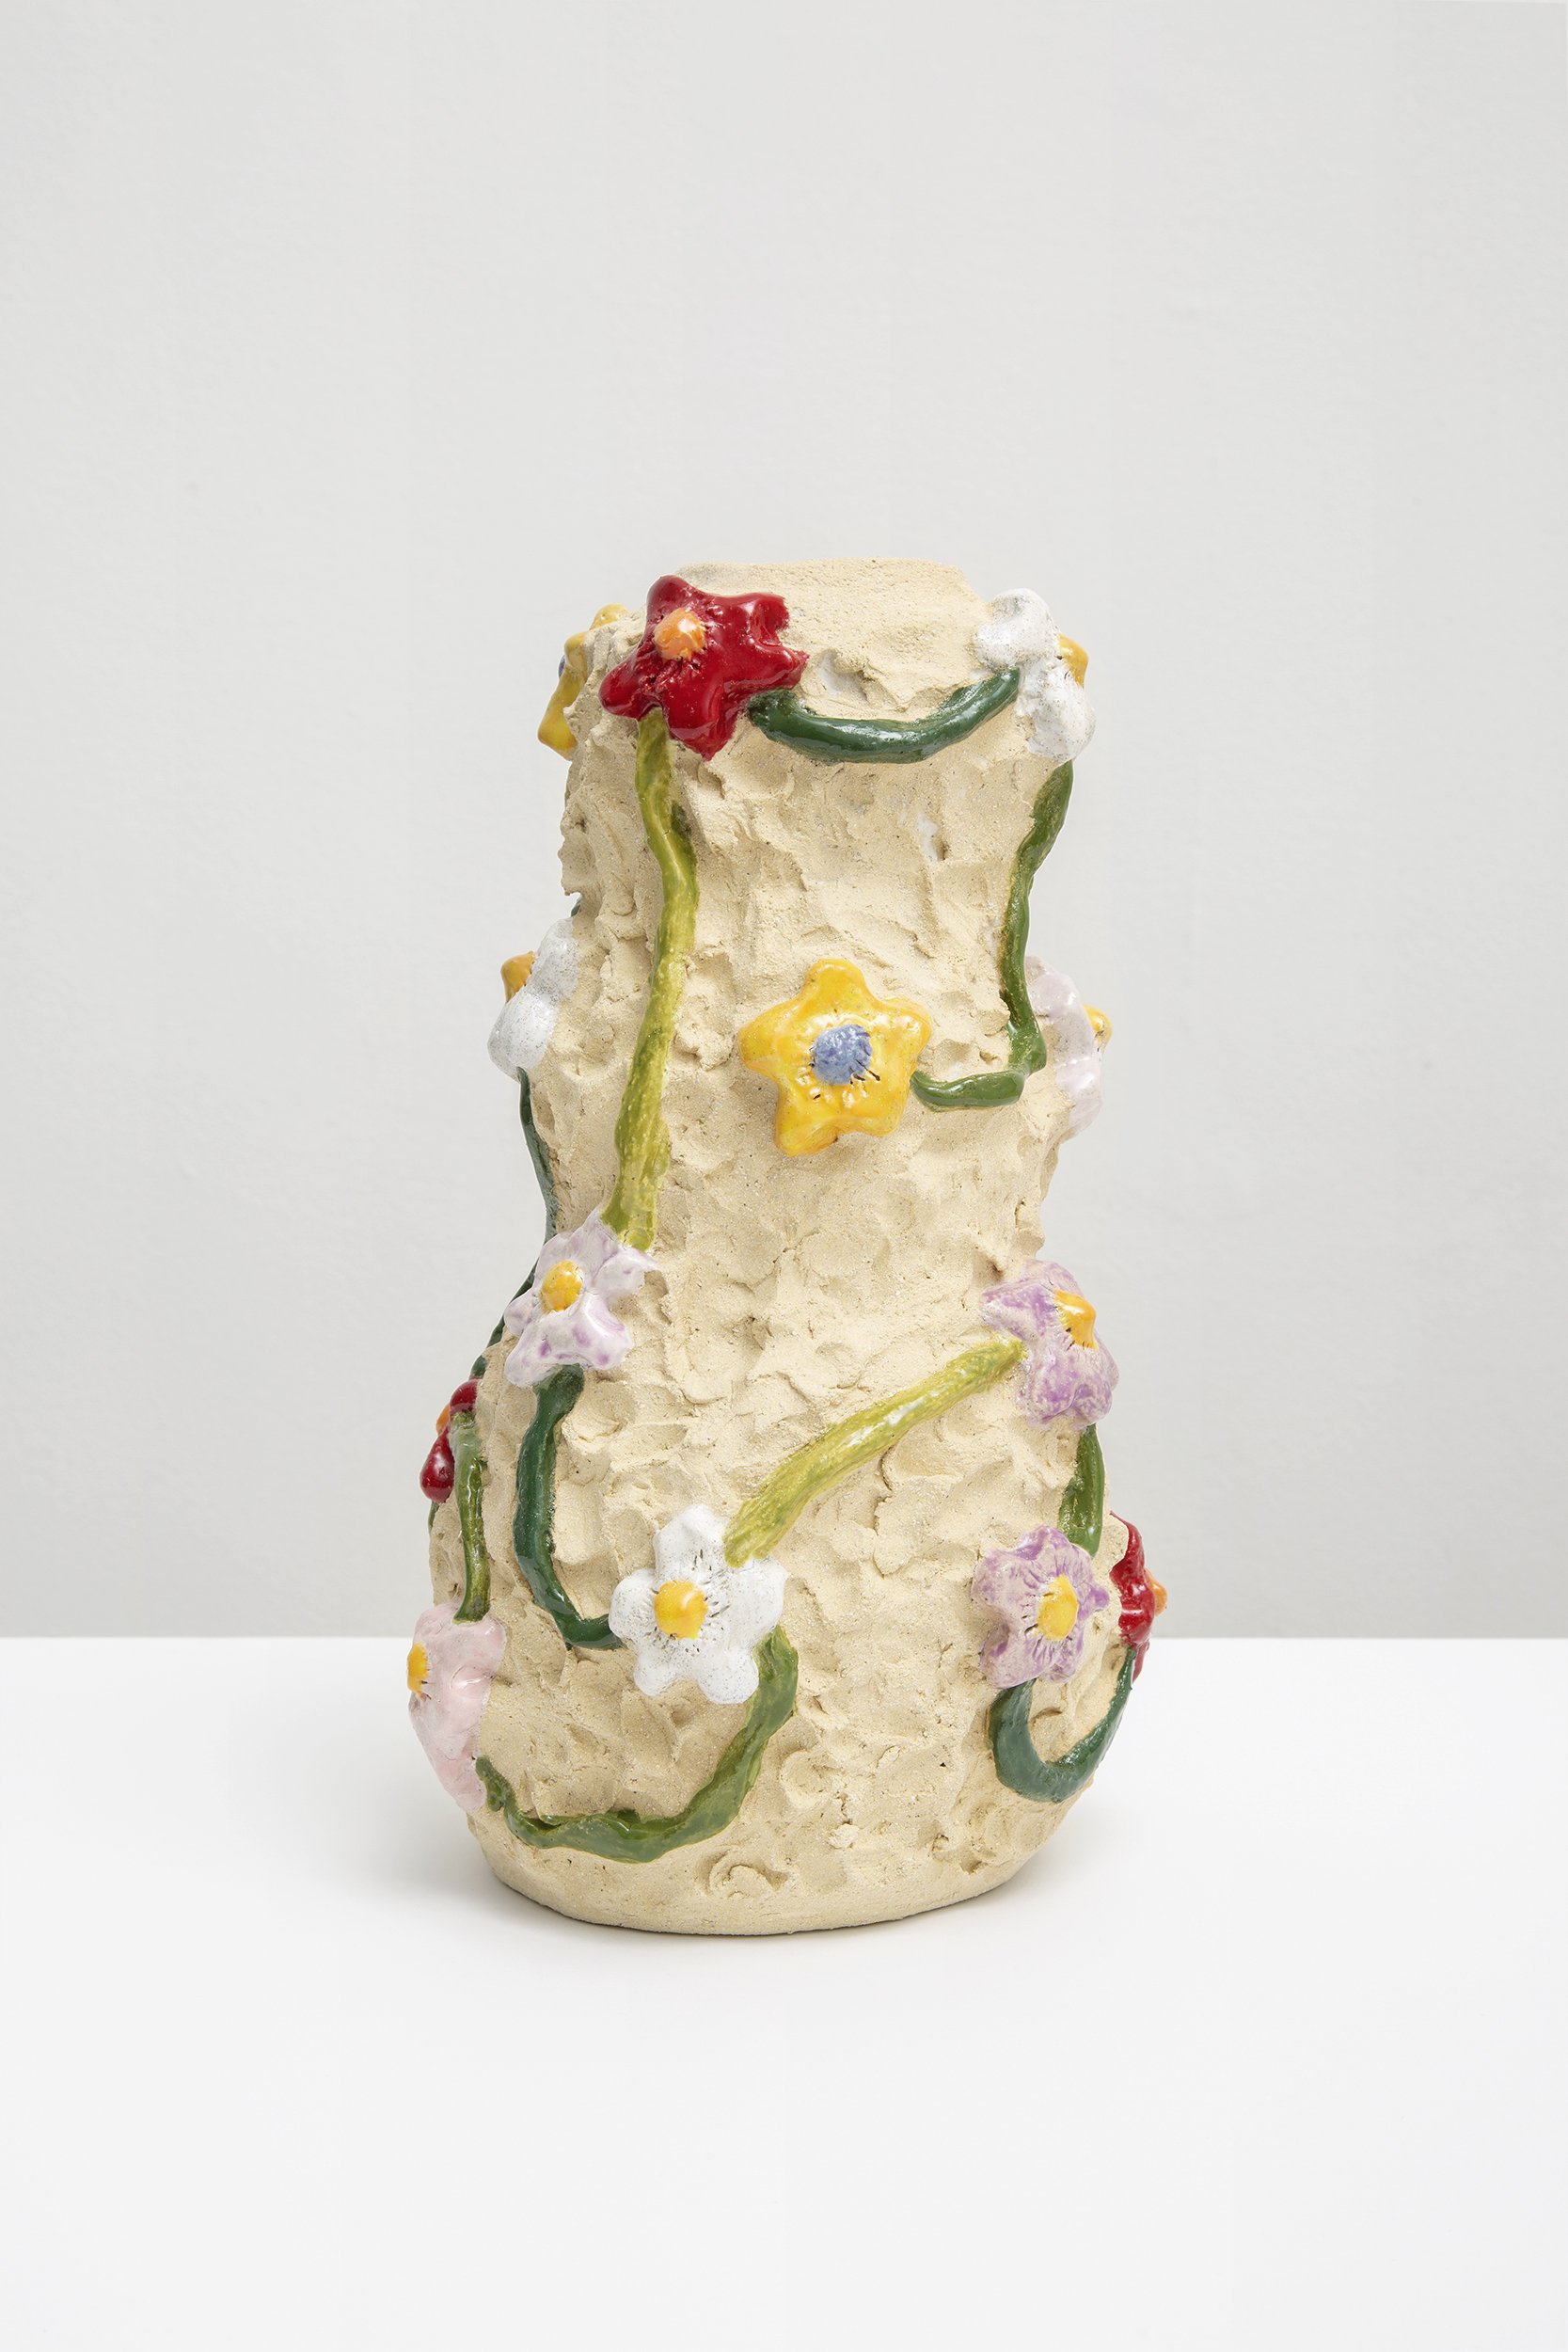  “Flowers on Sand”  Yellow Stoneware Vessel, 2021  7” x 7” 12.5”  Included in: “Spiral in Stone” 2021 